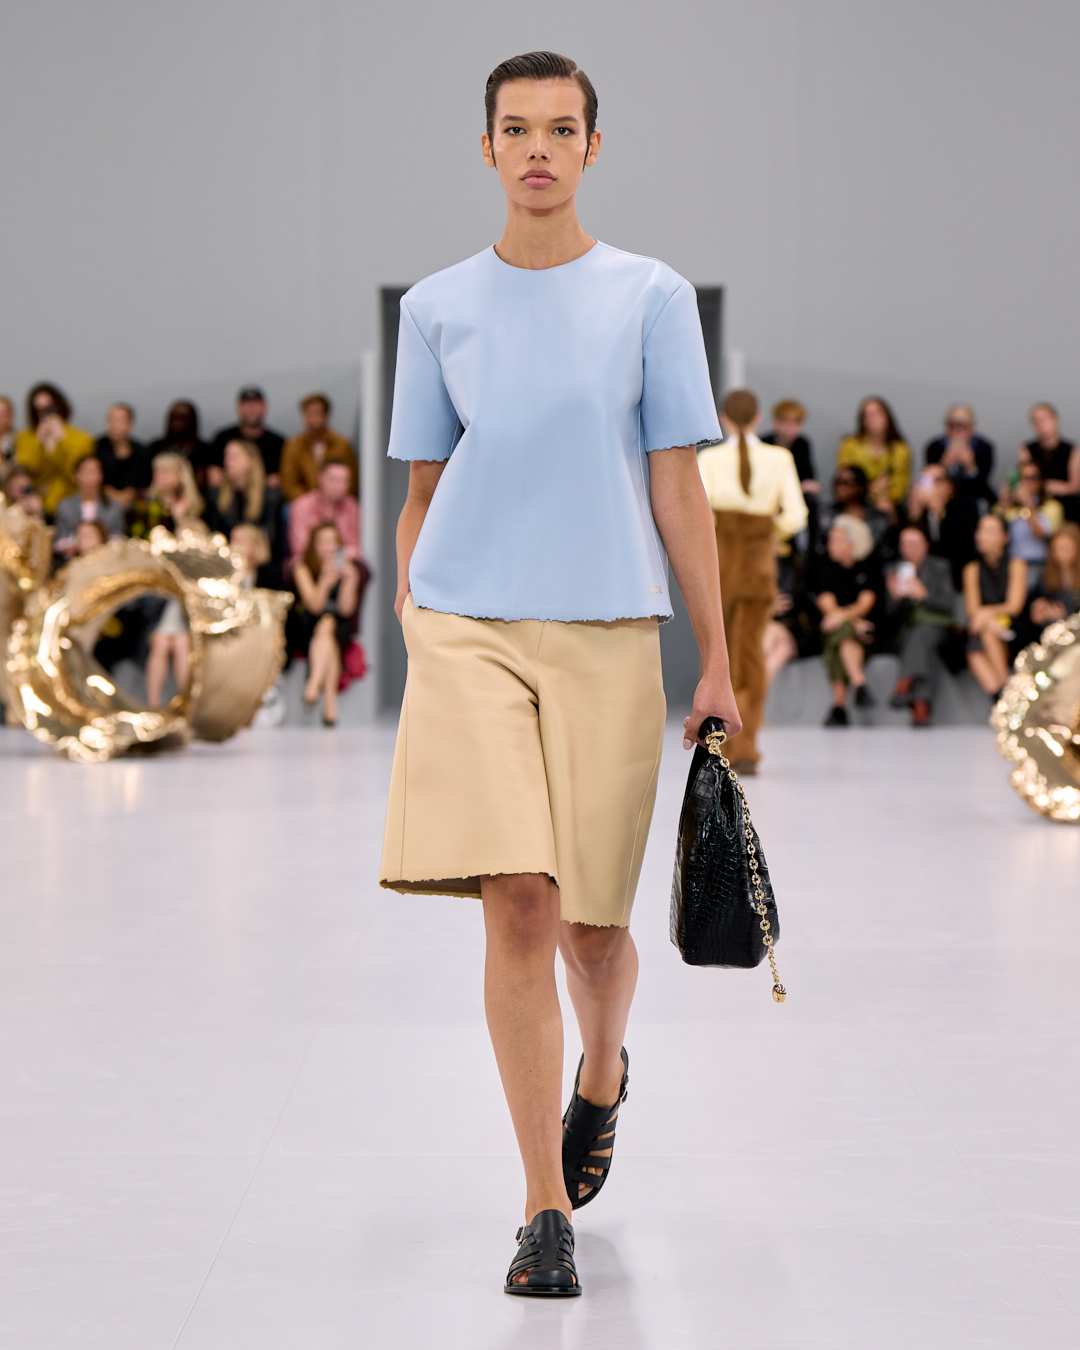 LOEWE by JONATHAN ANDERSON (Part 2) + SS2024 + PARIS FASHION WEEK. Runway  images of the SS2024 collection from LOEWE by JONATHAN ANDERSON…